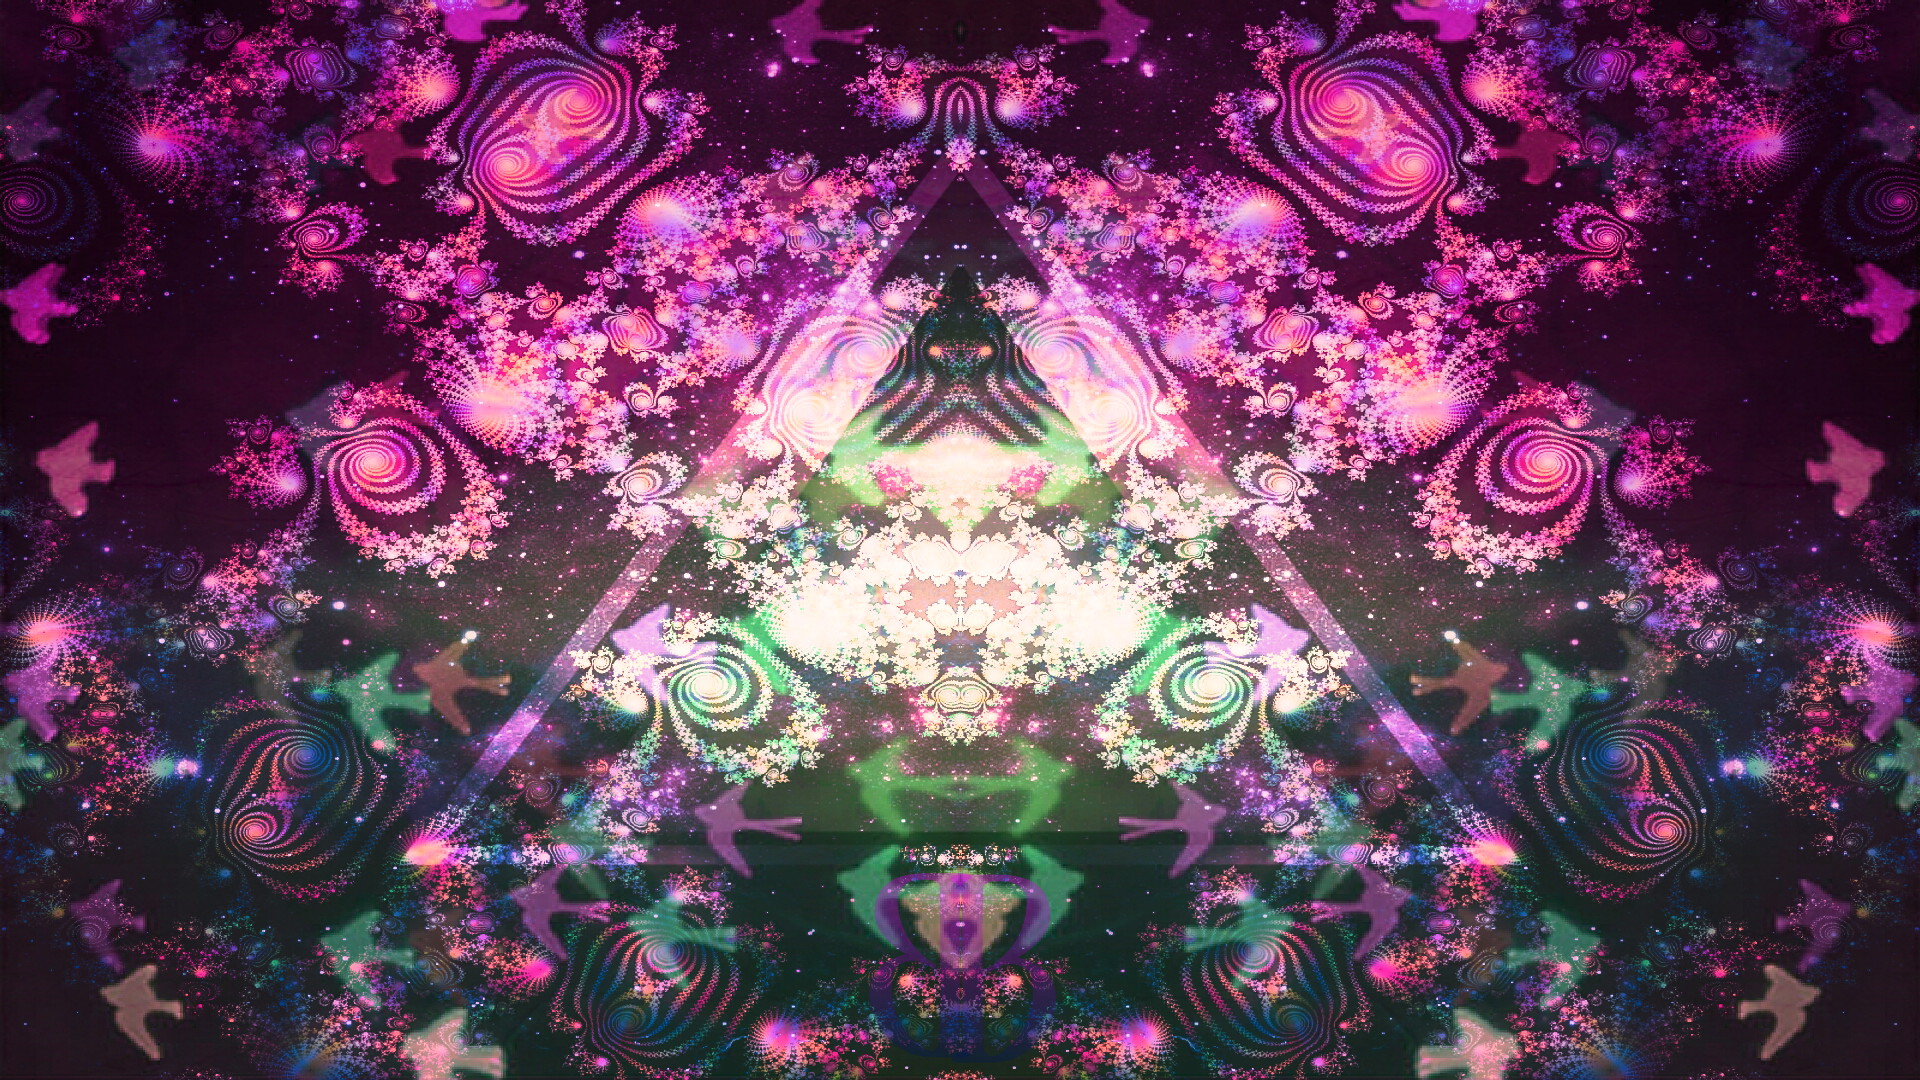 psychedelic, artistic Full HD